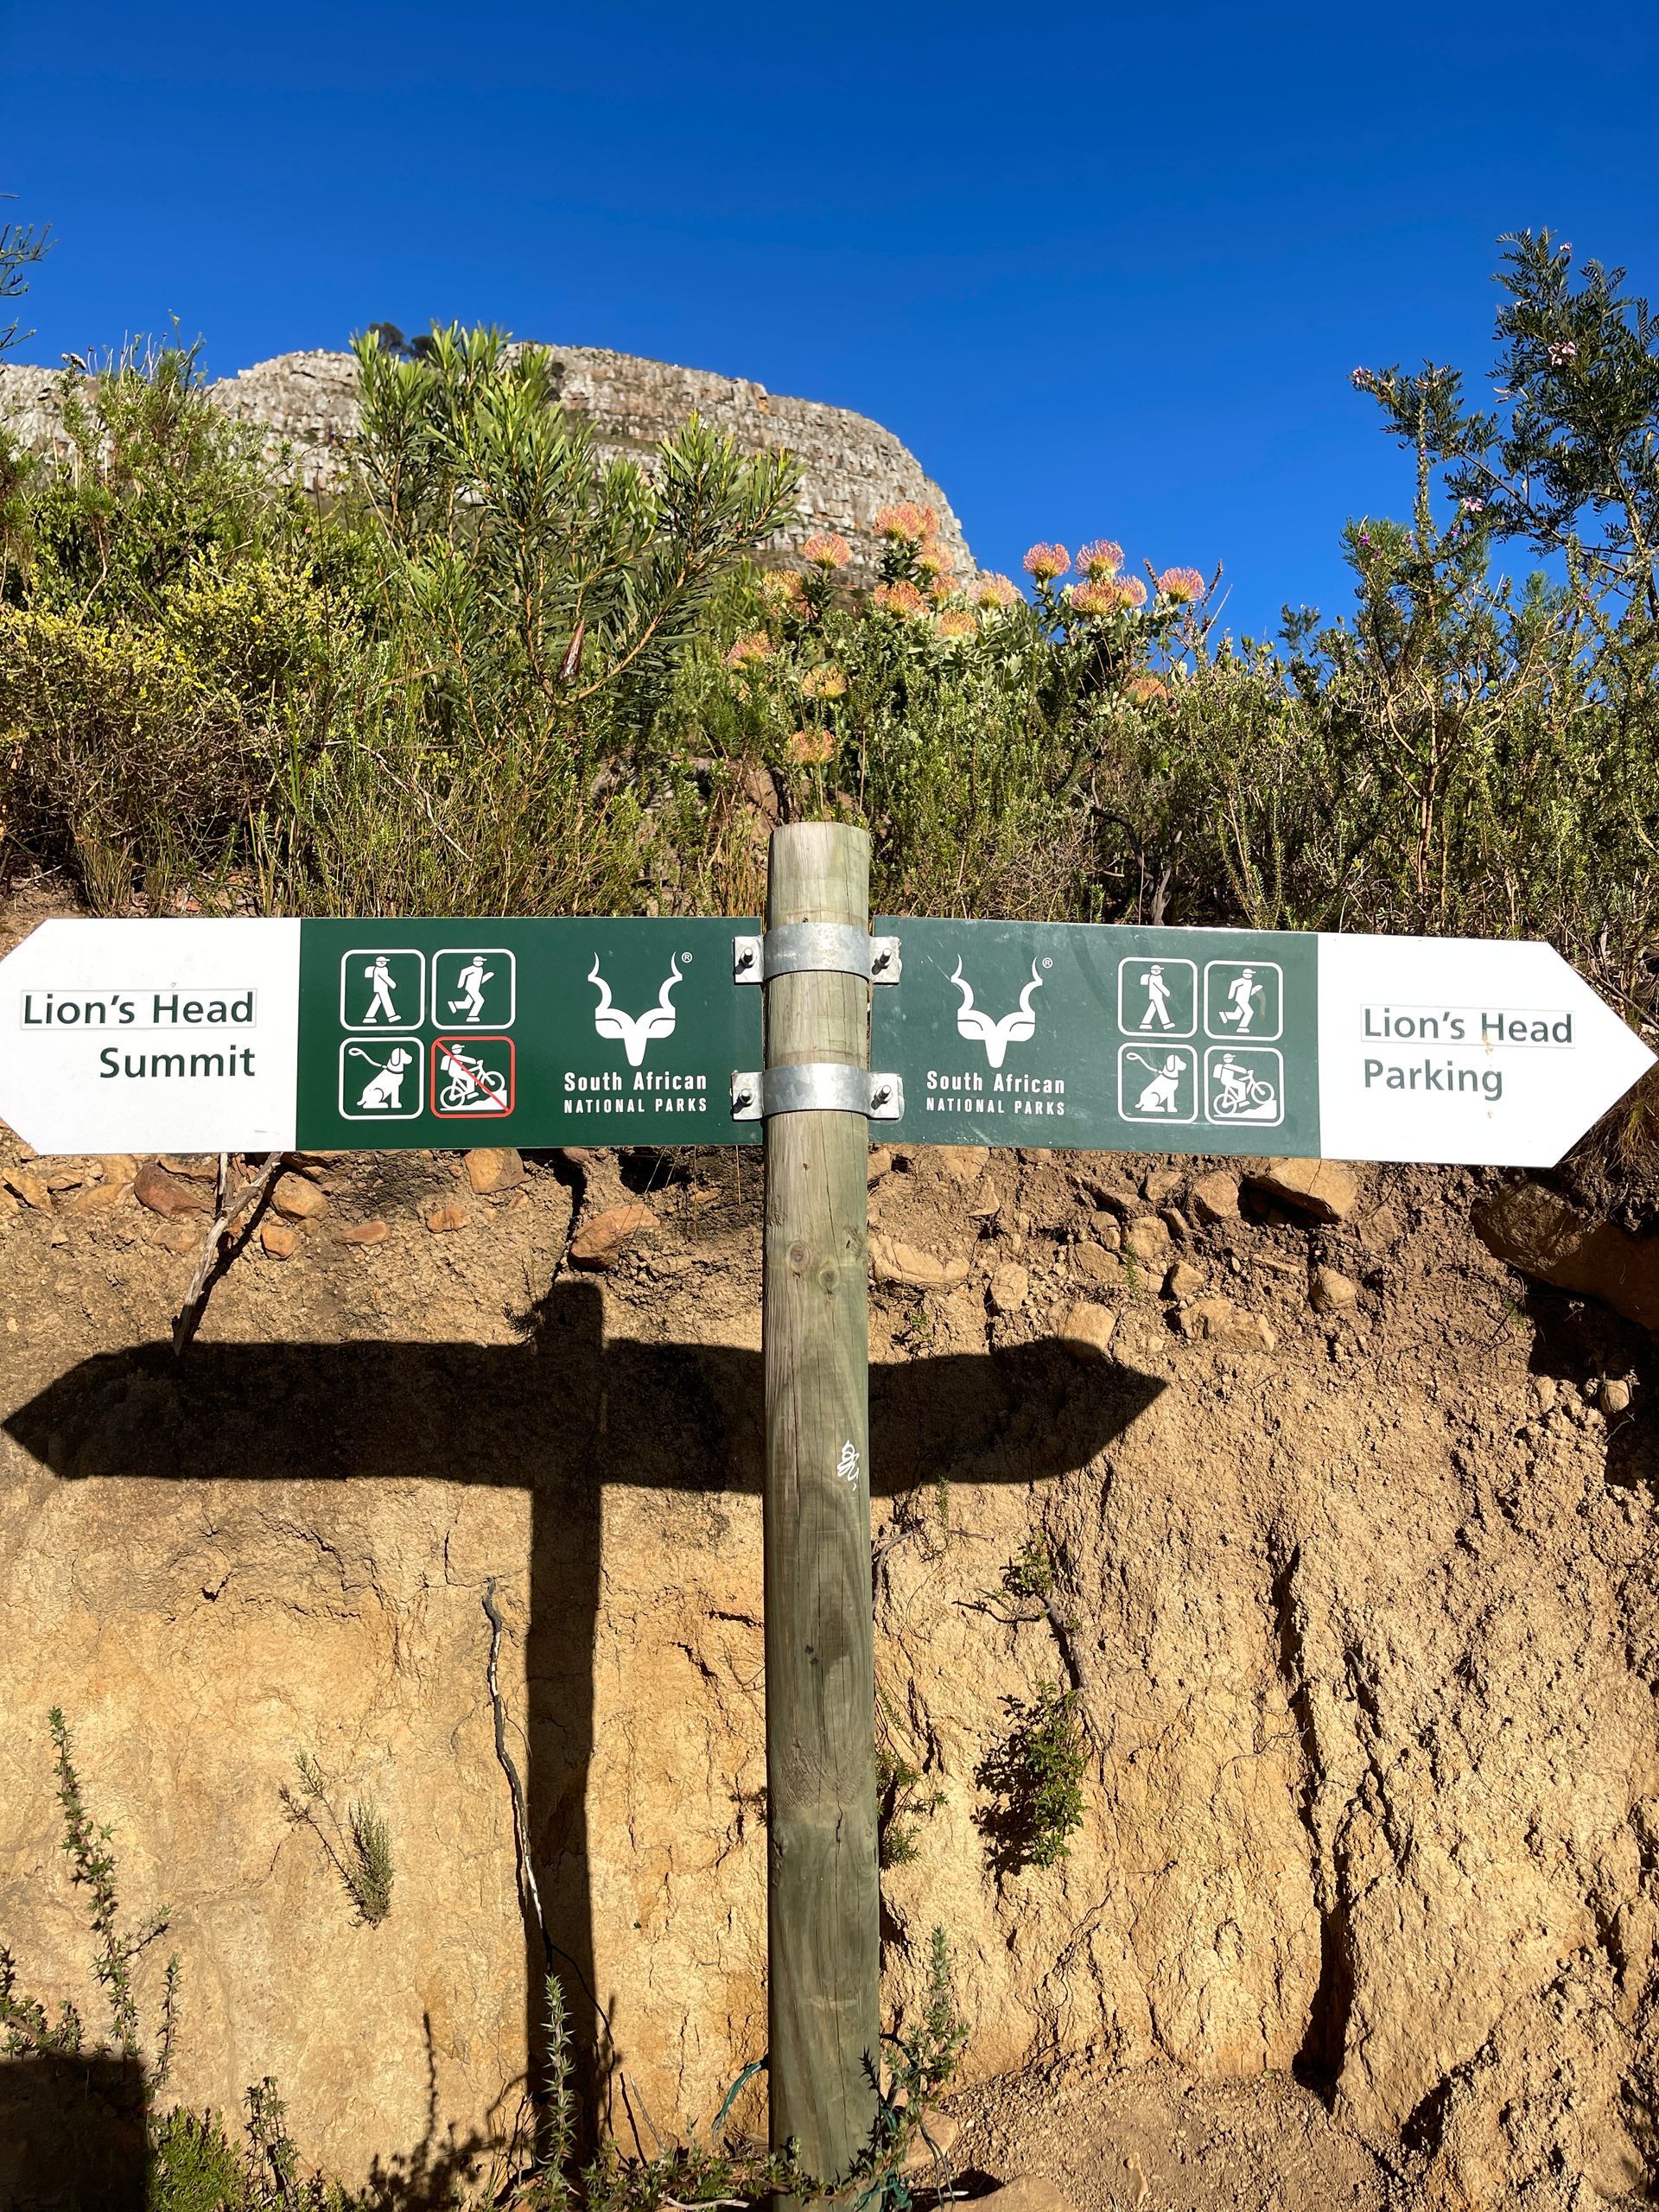 Close-up of the Lions Head mountain start point sign, indicating the beginning of the iconic hiking